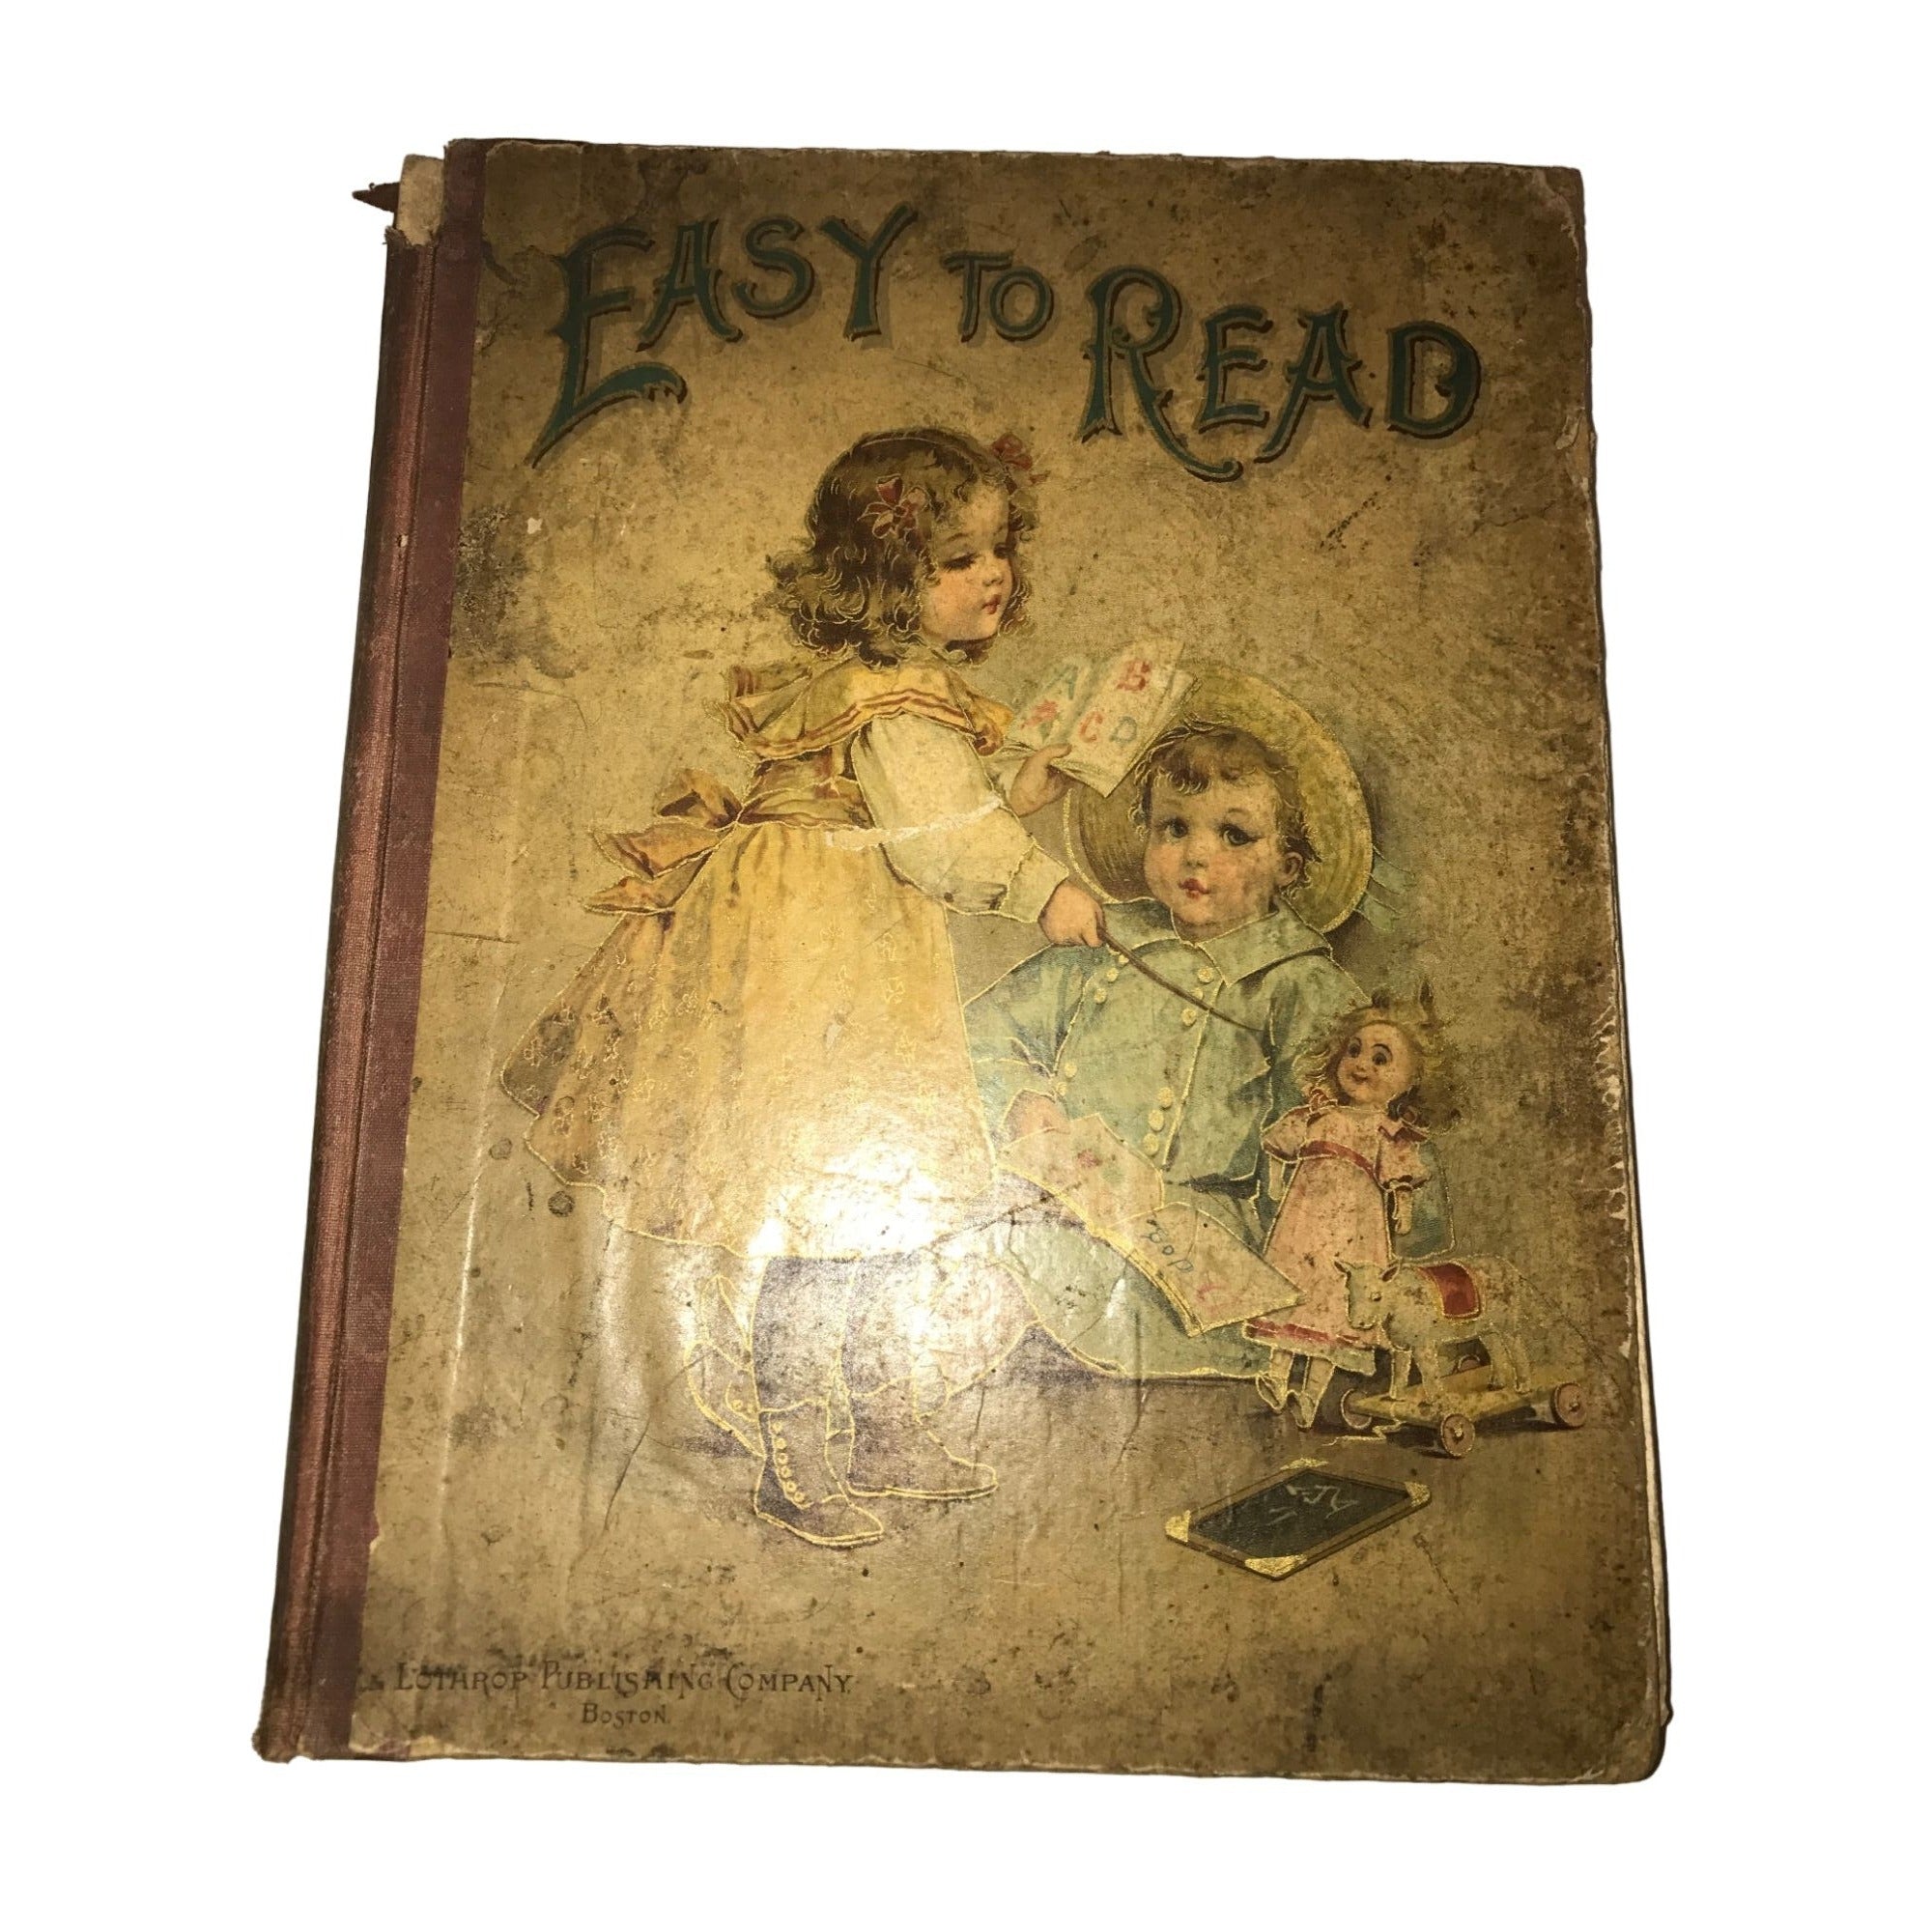 Antique Book - 1881 - Easy To Read - by lothrop publishing - spots and aging